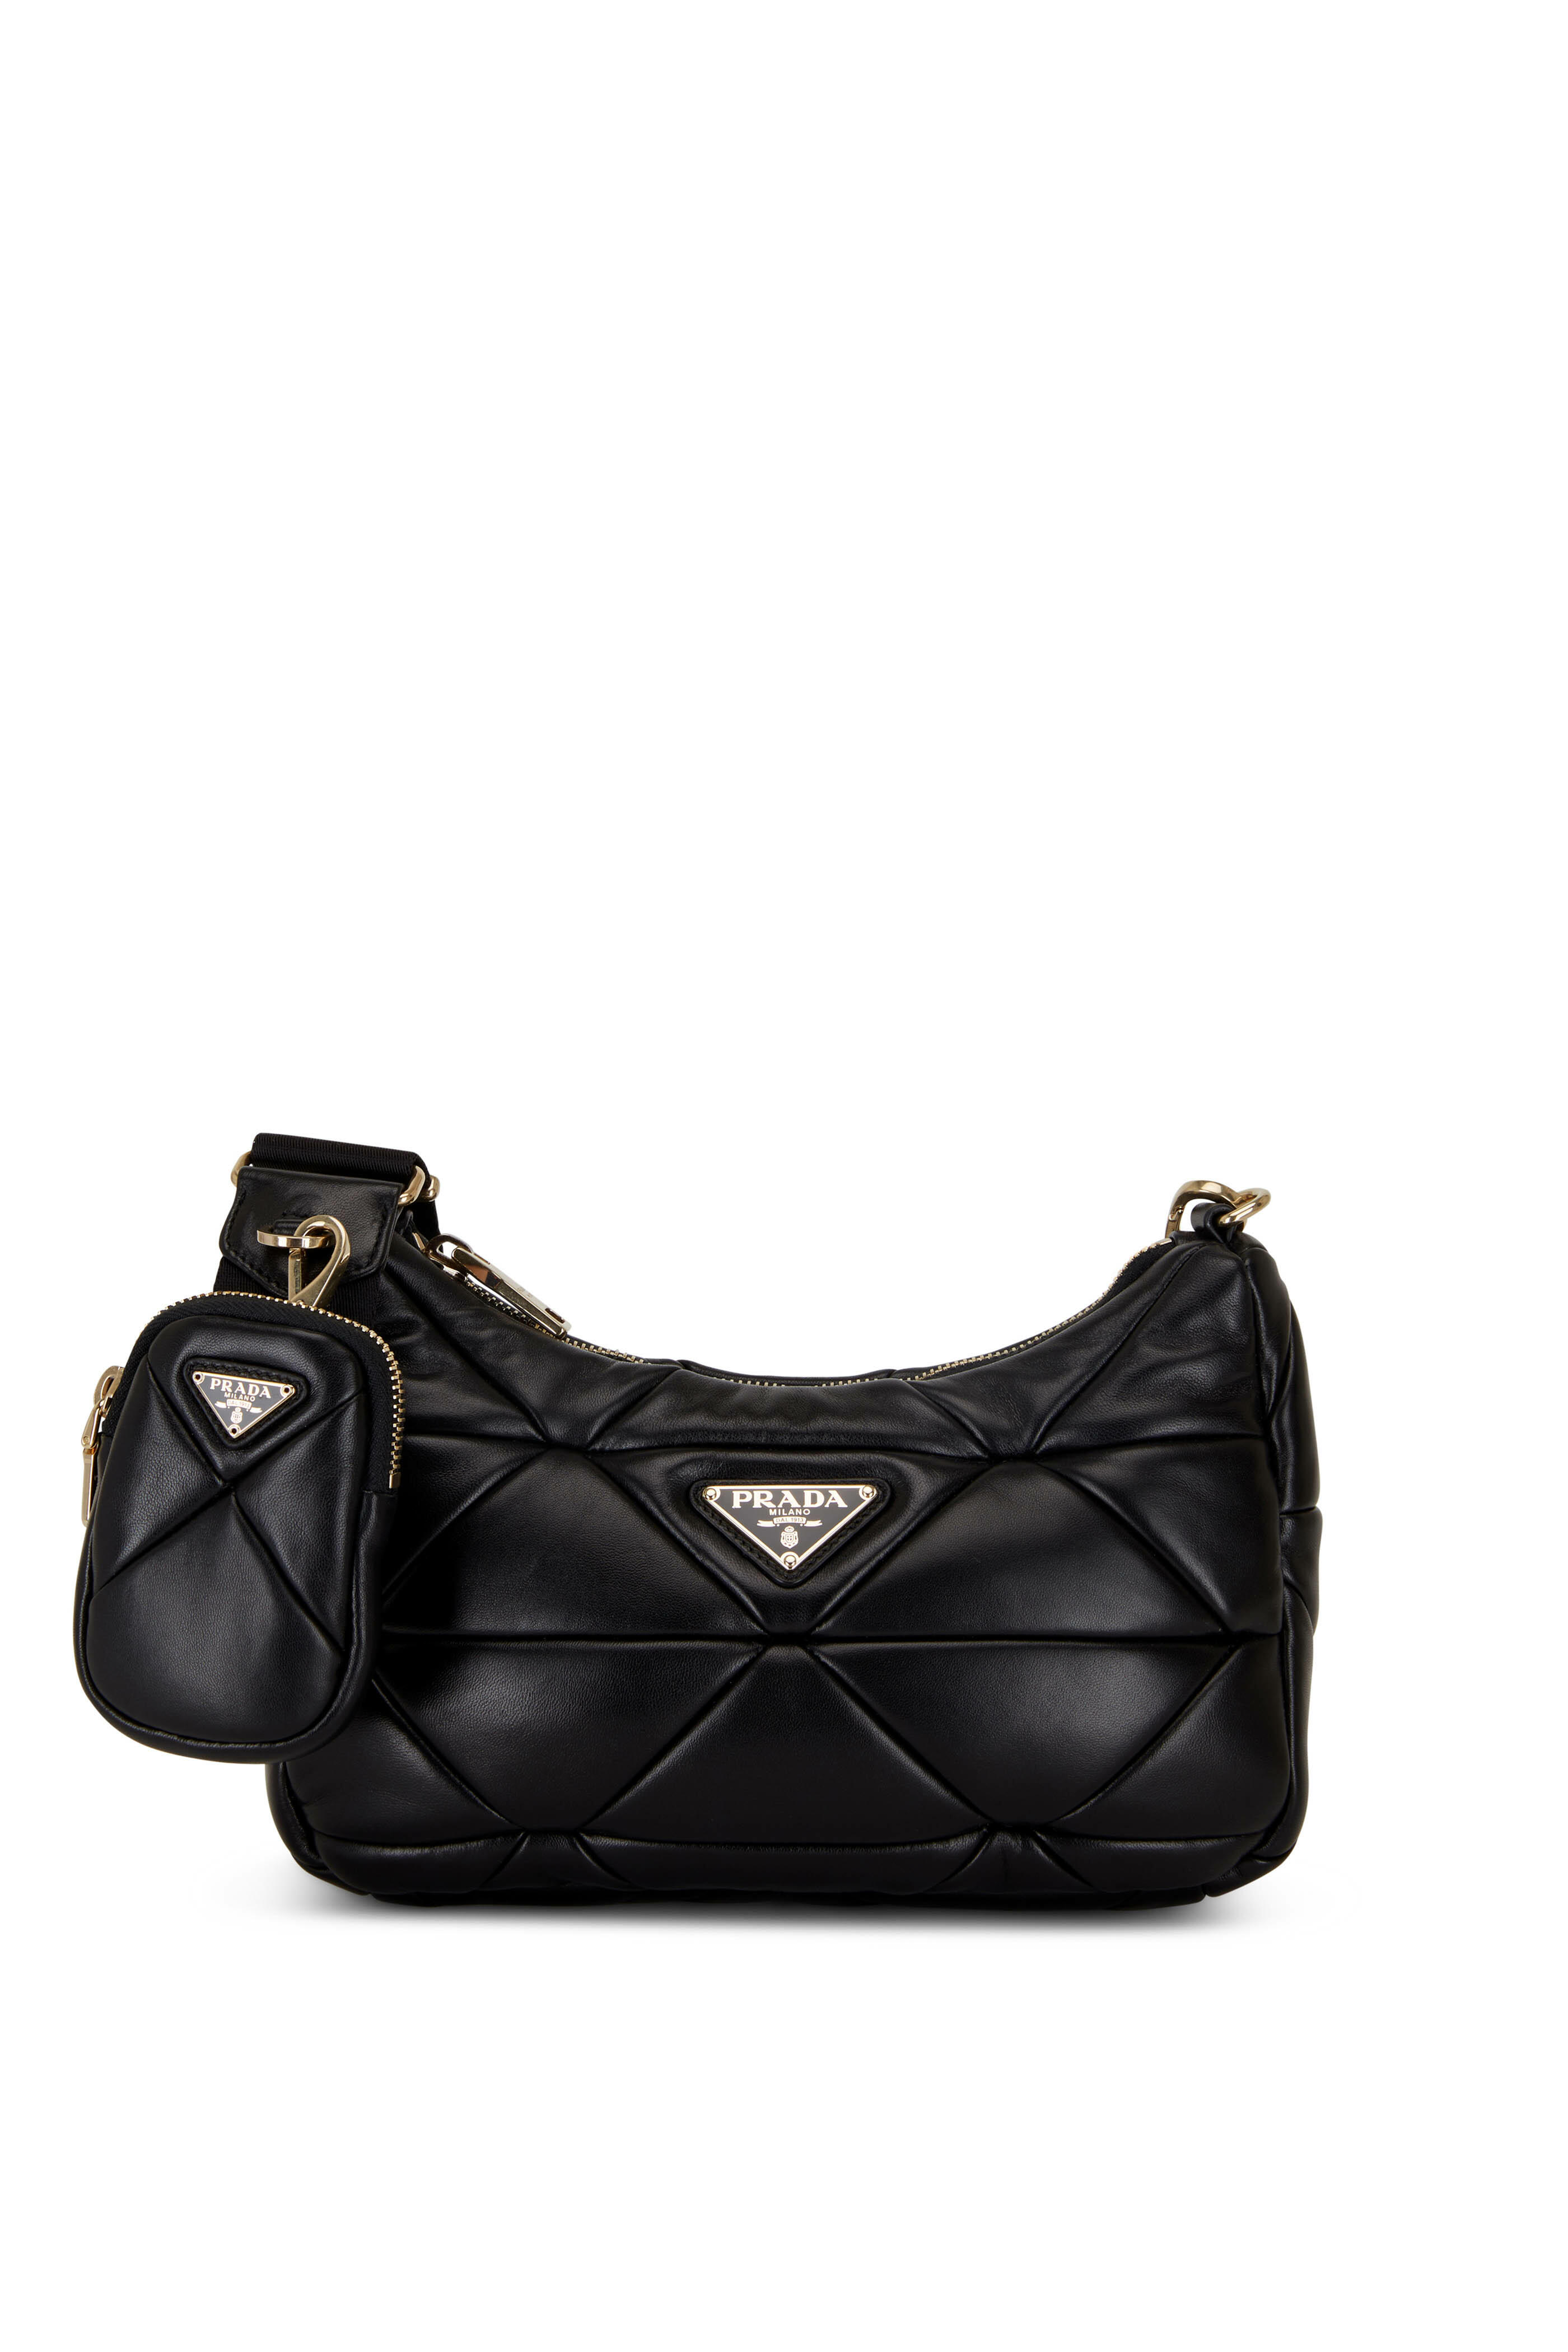 Prada - Women's Quilted Nappa Shoulder Bag - White - Leather